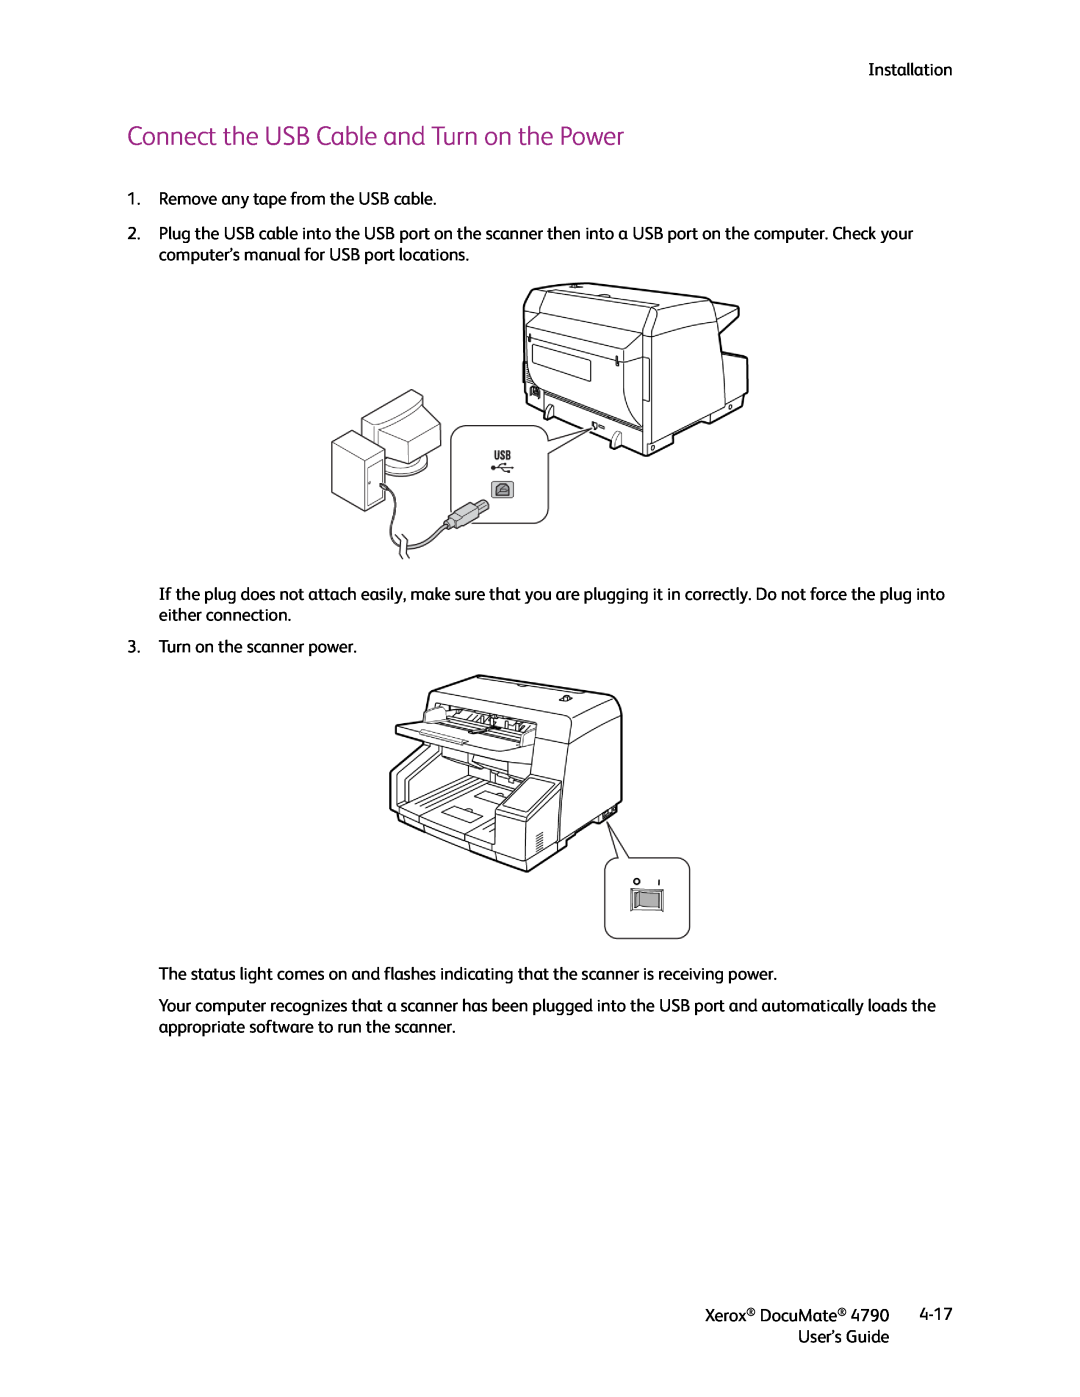 Xerox xerox documate manual Connect the USB Cable and Turn on the Power 